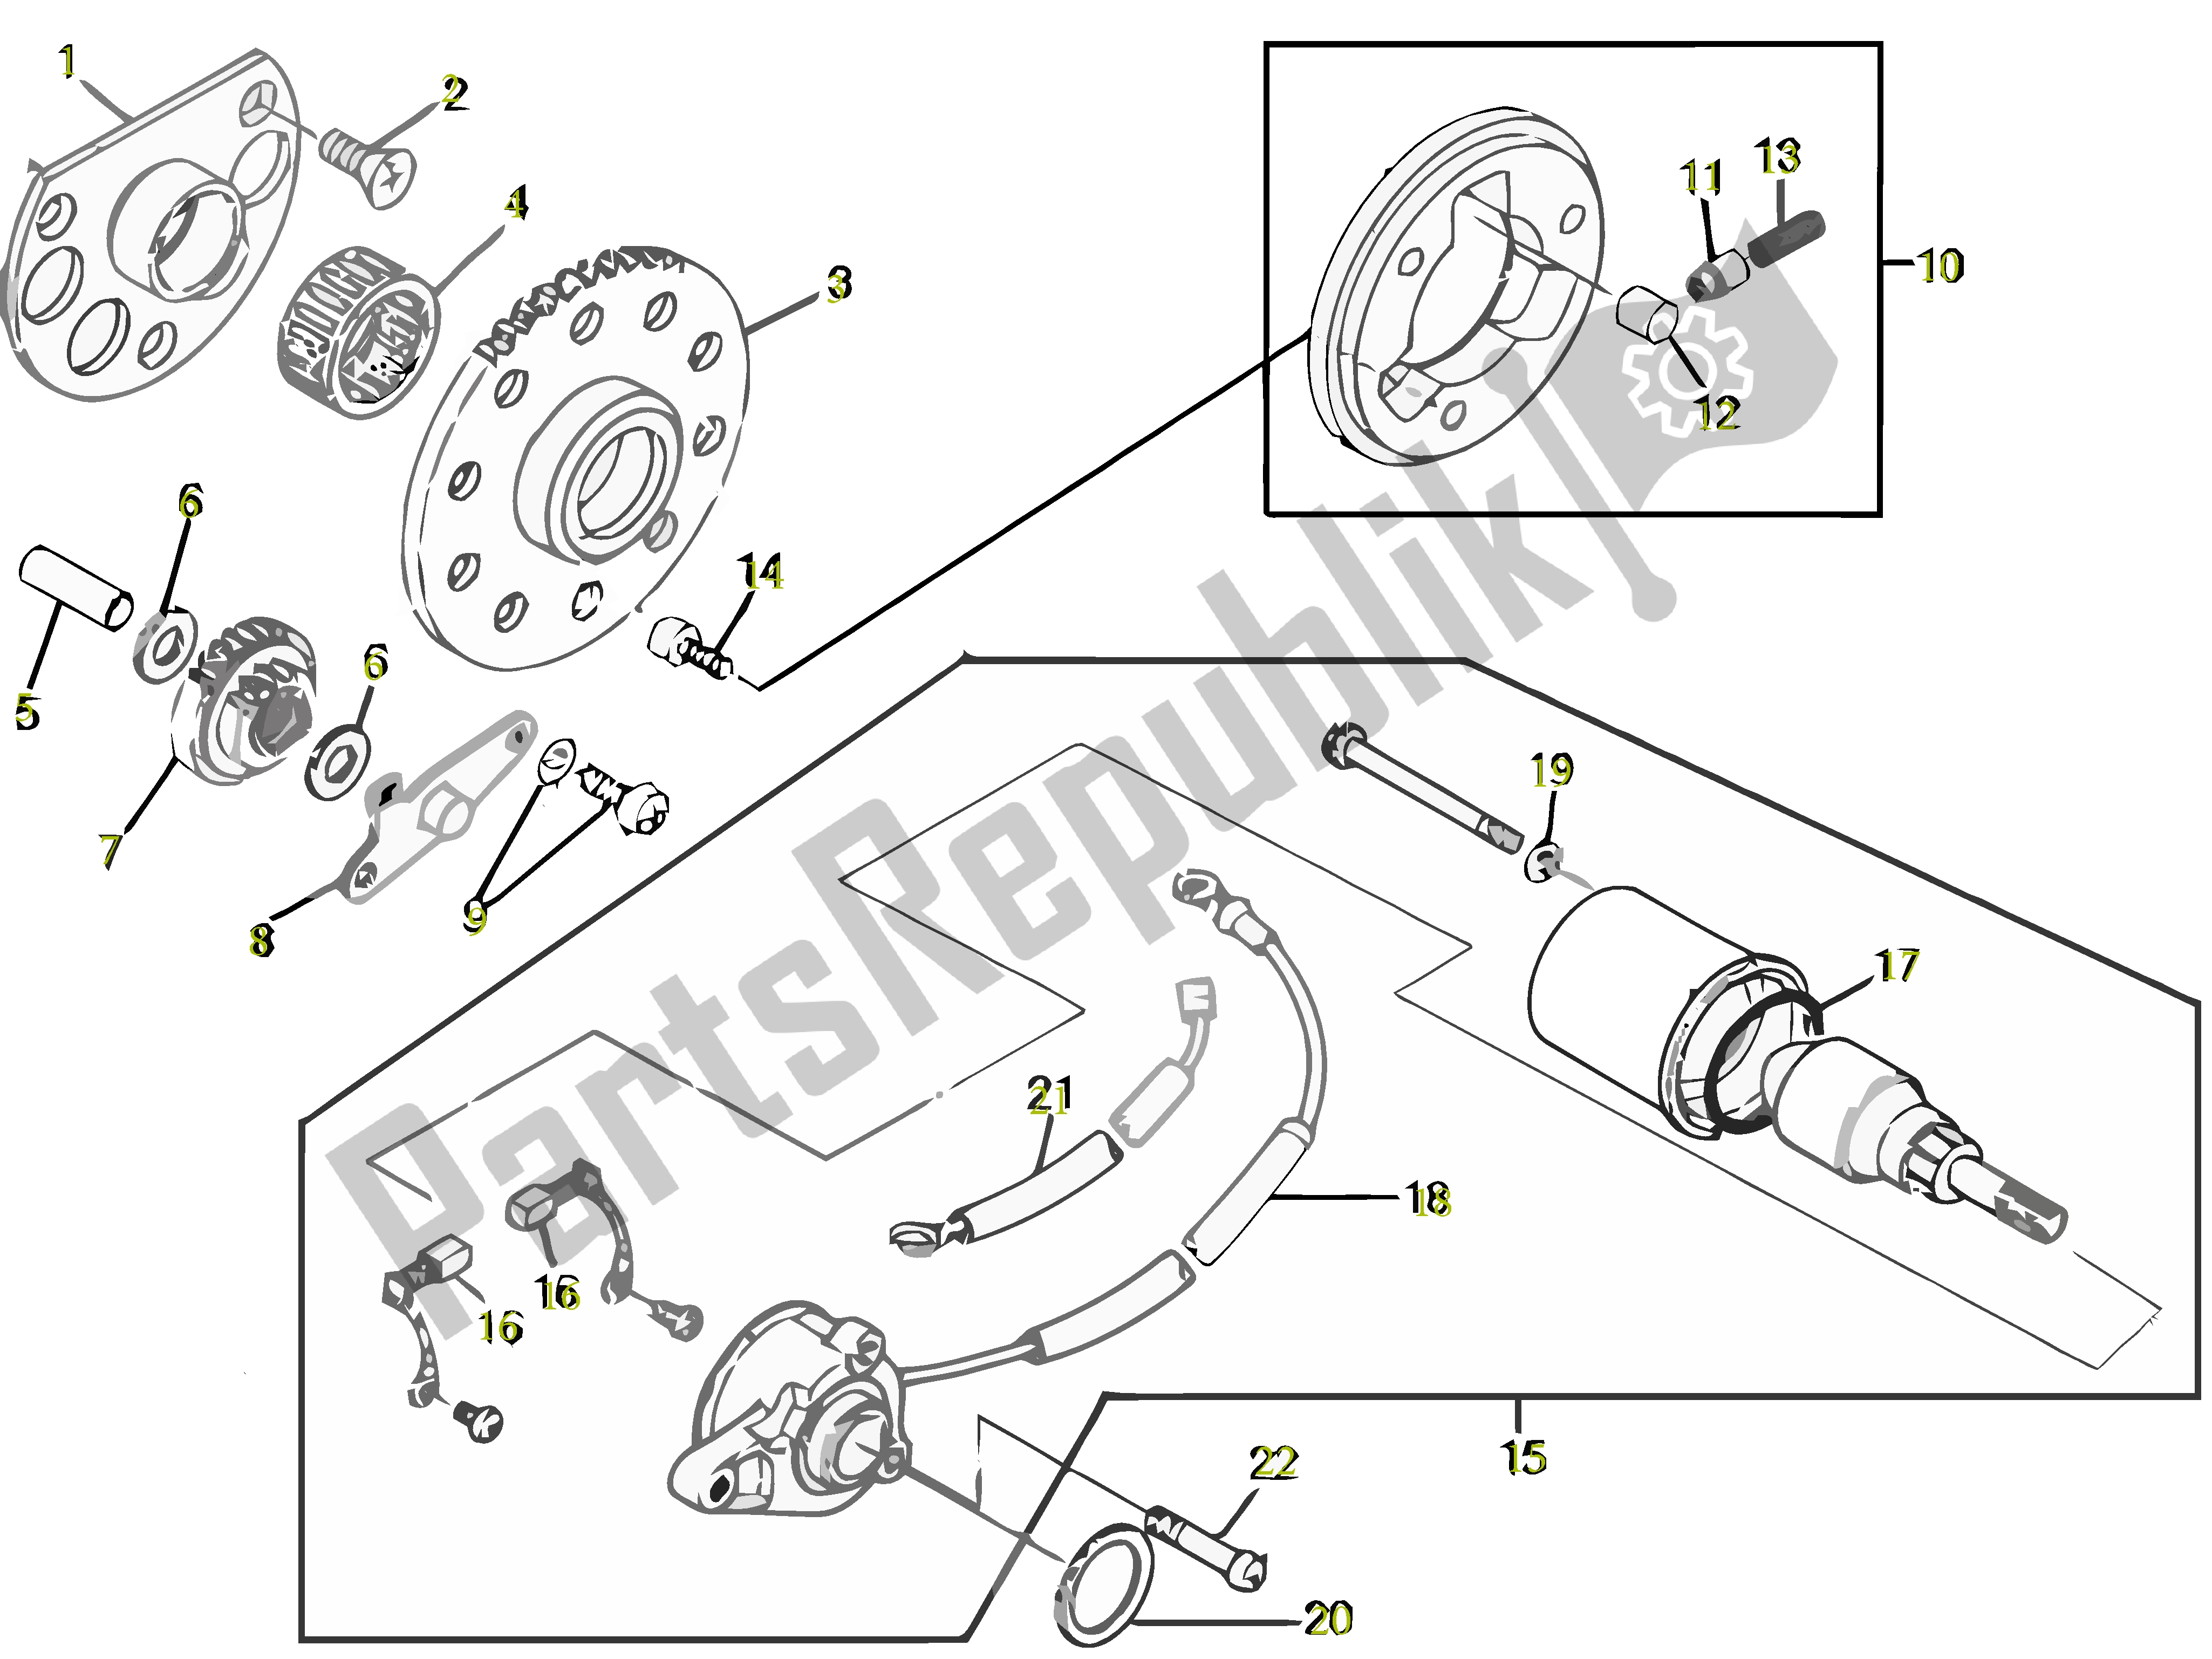 All parts for the Startmotor of the Gilera SC 125 2007 - 2015